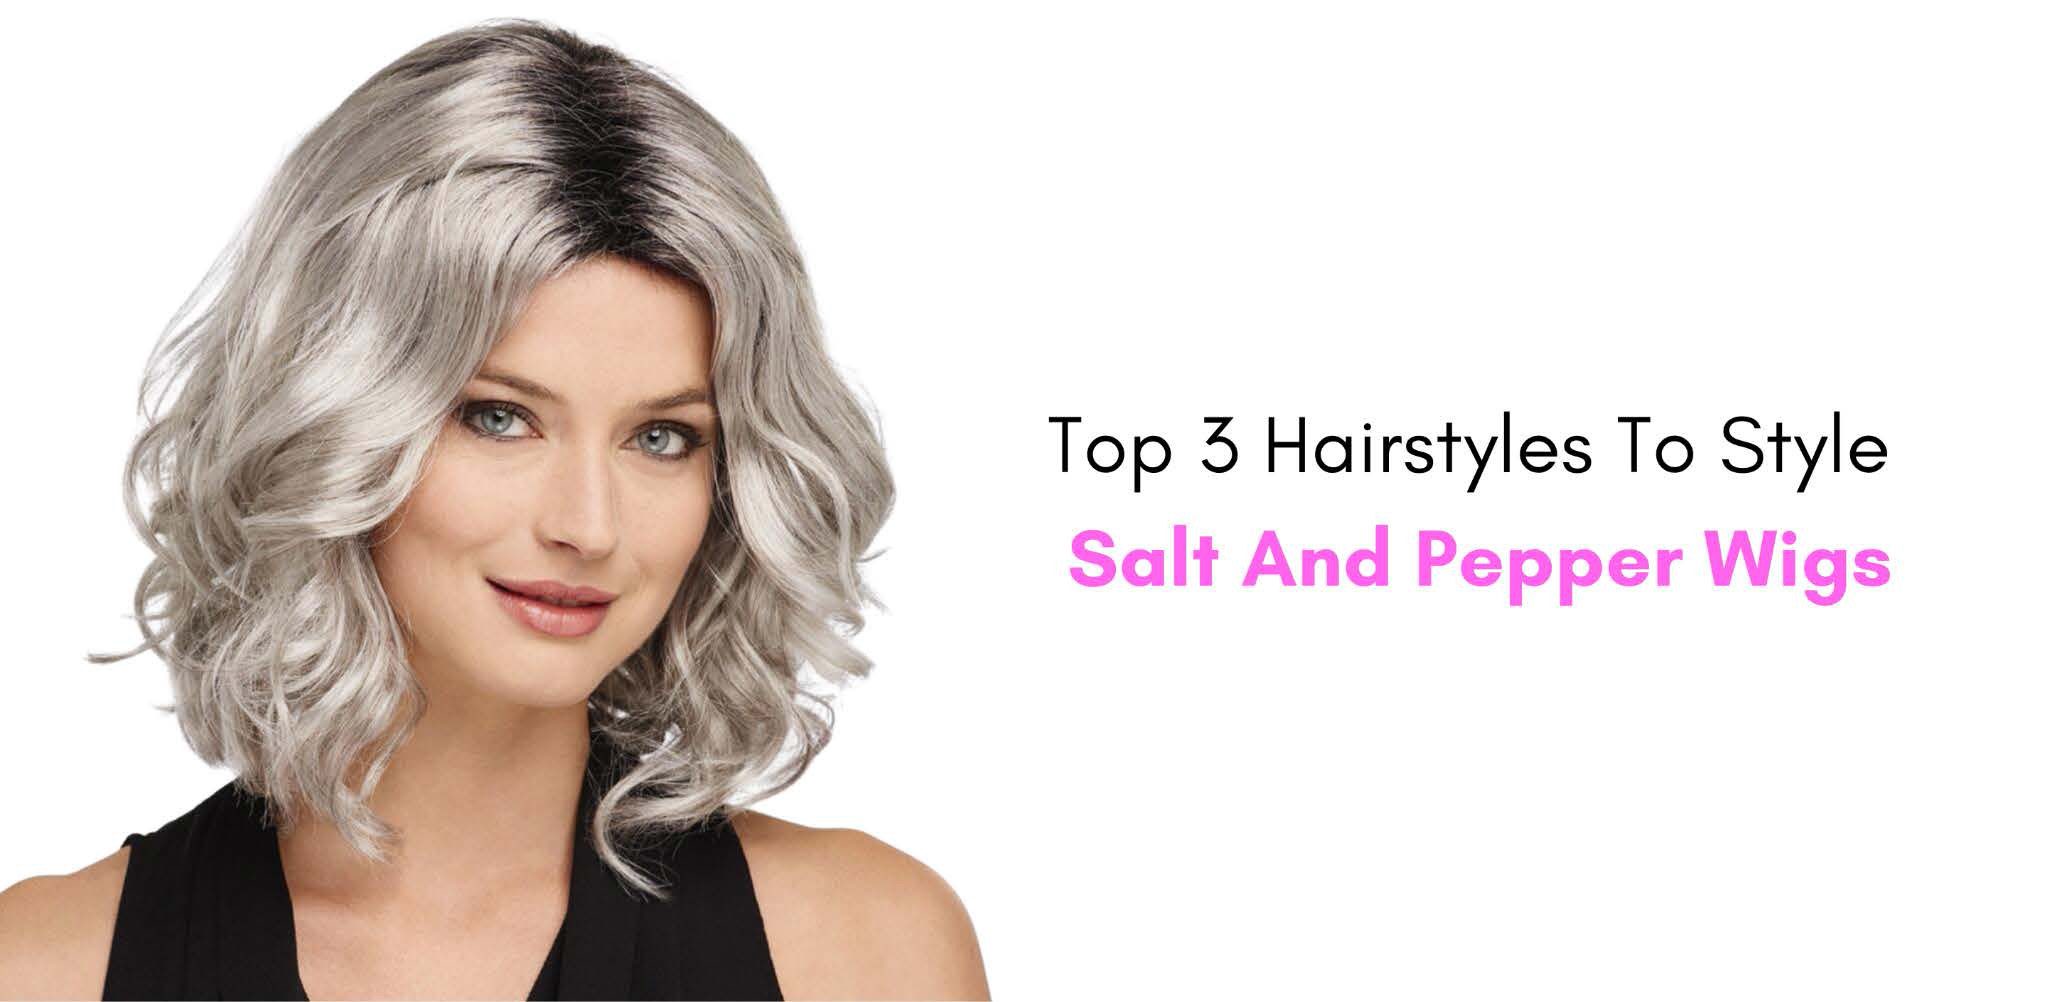 Top 3 Hairstyles To Style Salt and Pepper Wigs